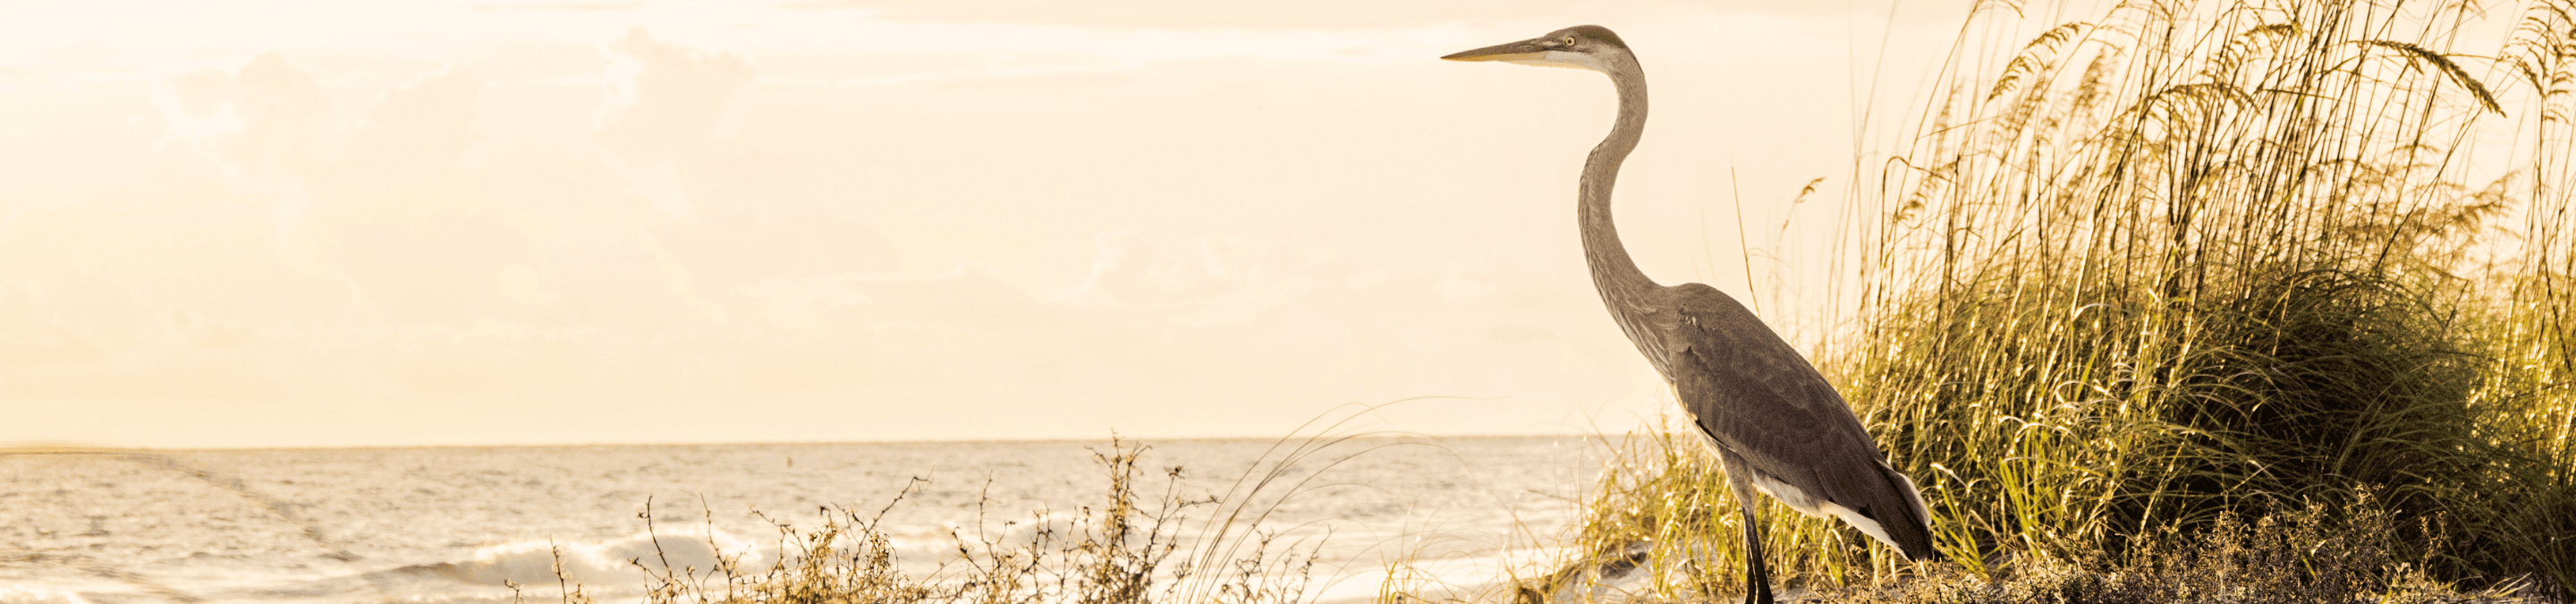 blue heron standing in tall grass on the beach at sunset looking out over the gulf of Mexico